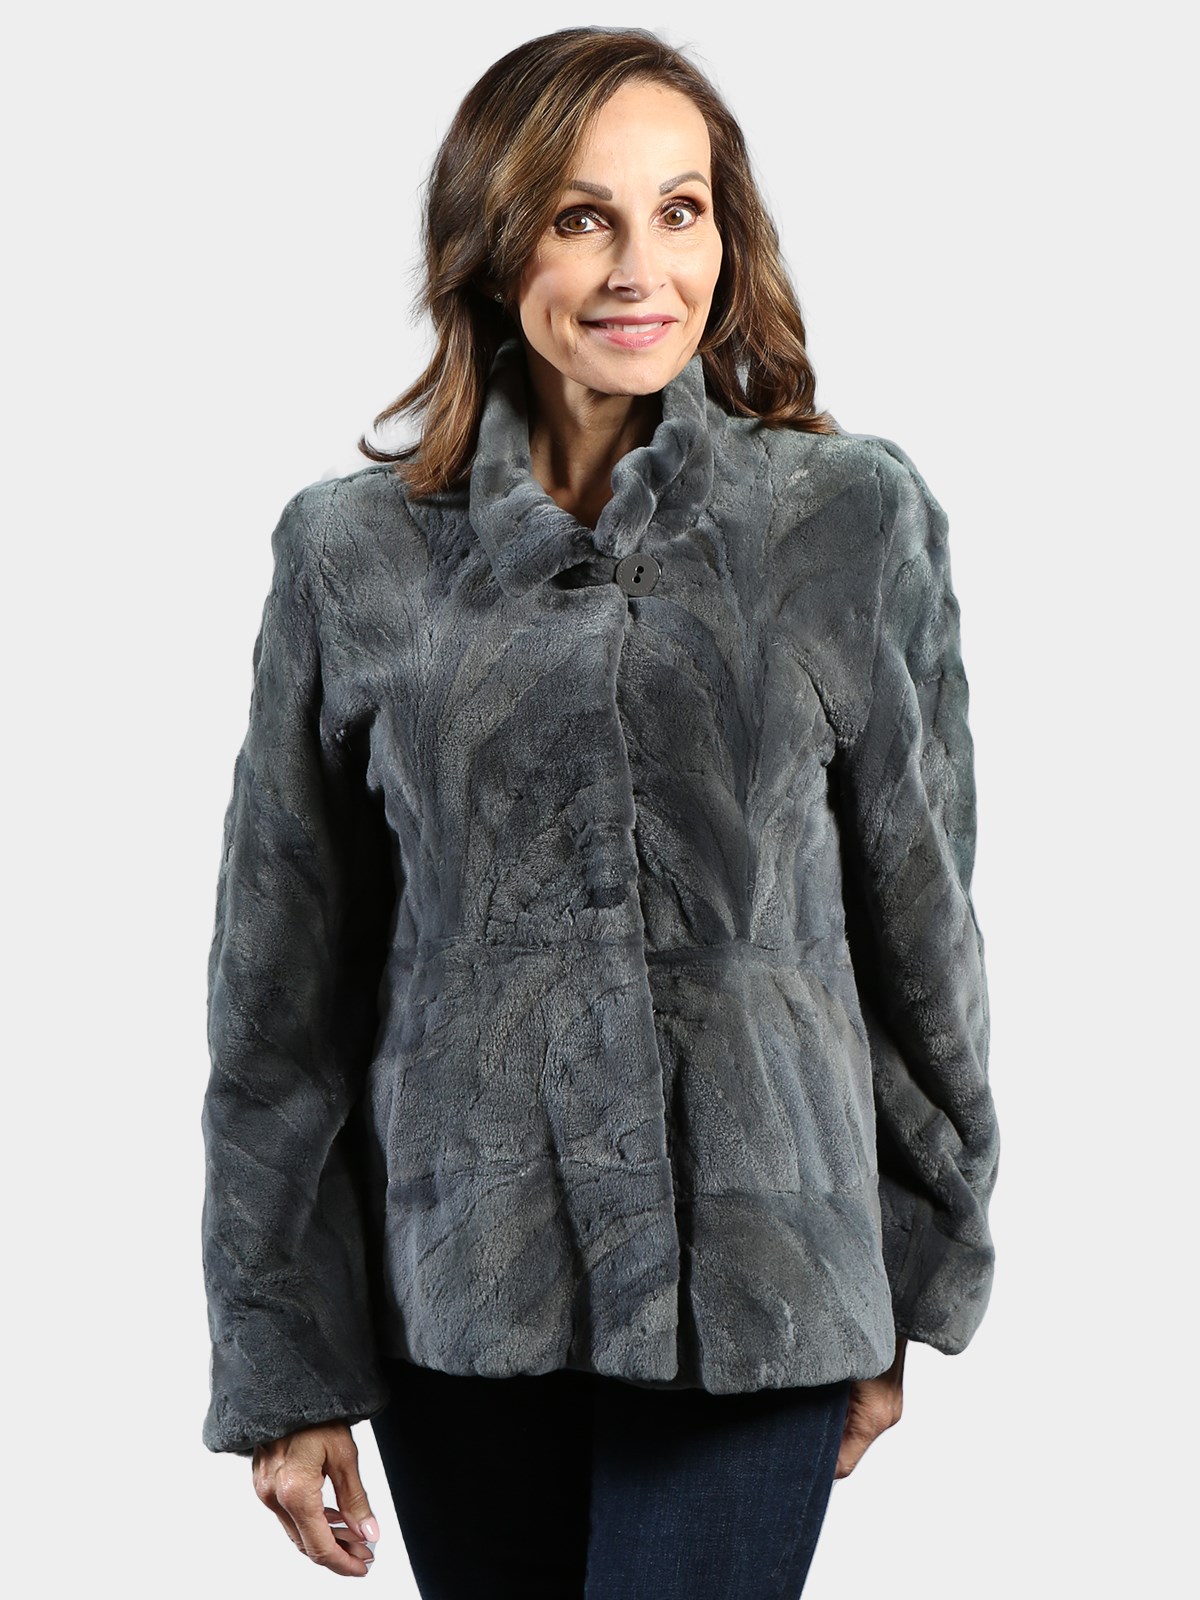 Woman's Sheared and Sculptured Sapphire Grey Mink Fur Jacket 